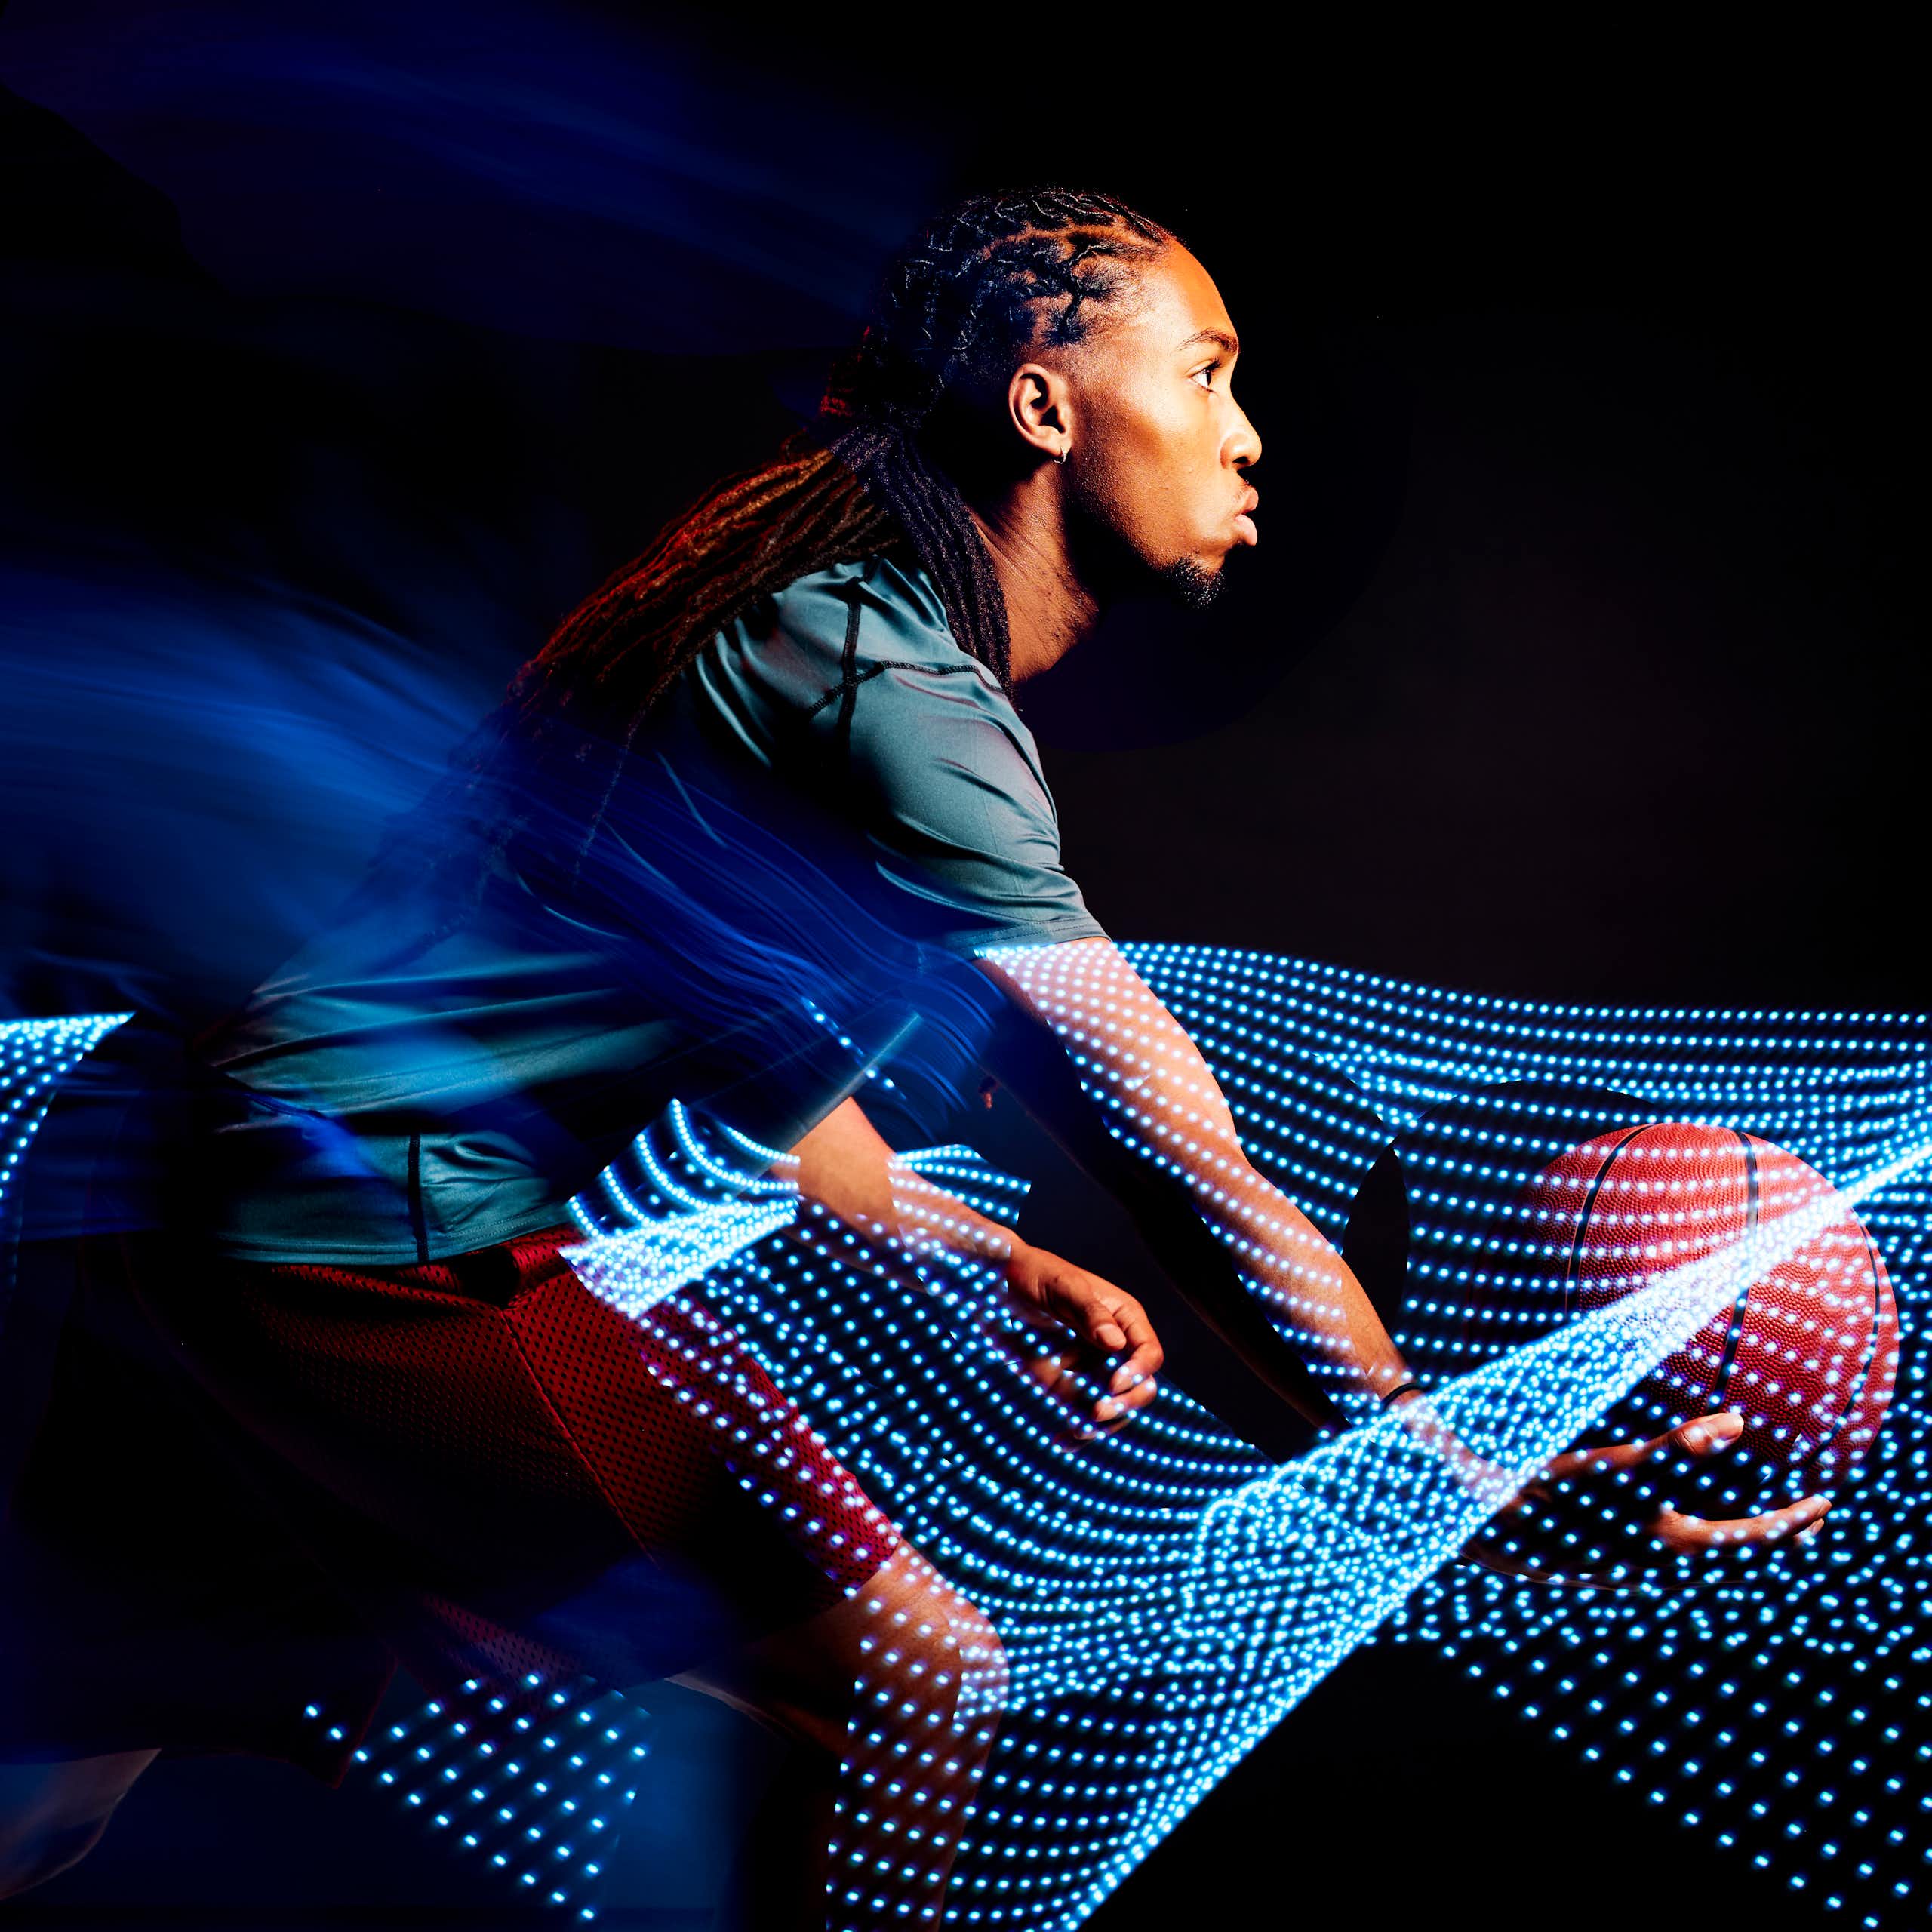 A young man with a basketball moves amid images of computer-generated motion waves.